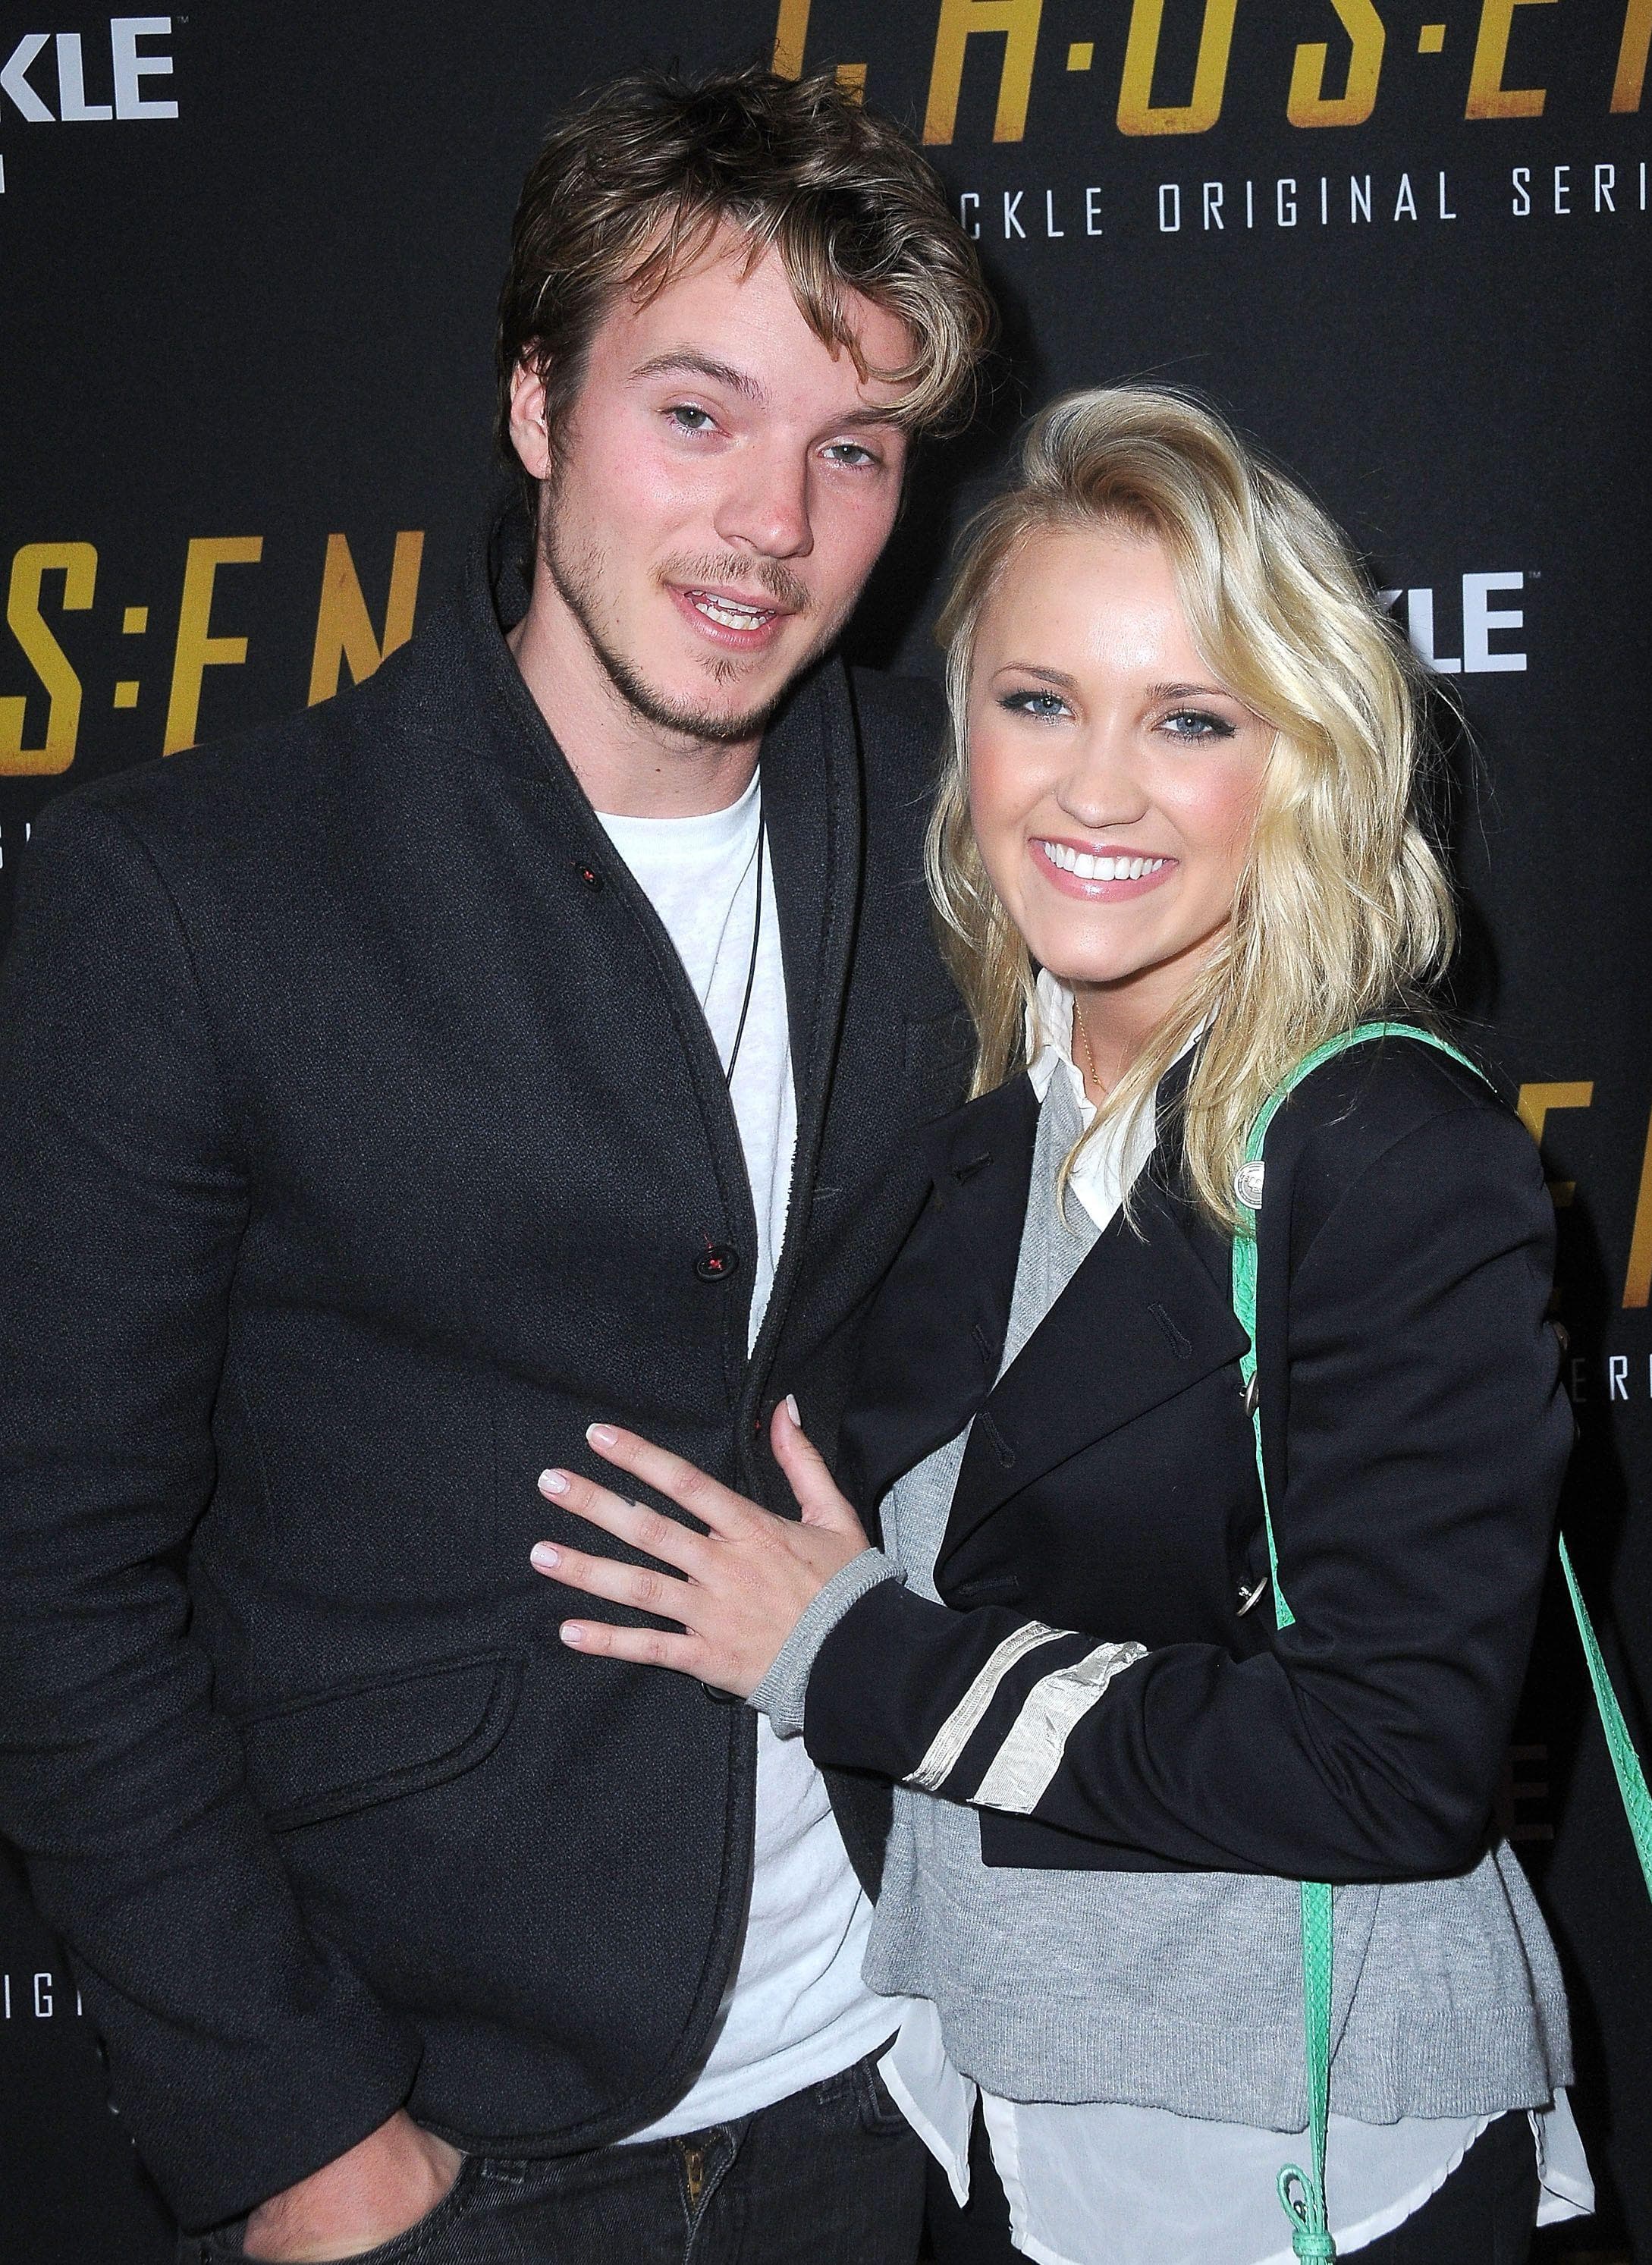 A Mitchel Musso 2013-os Emily Osment